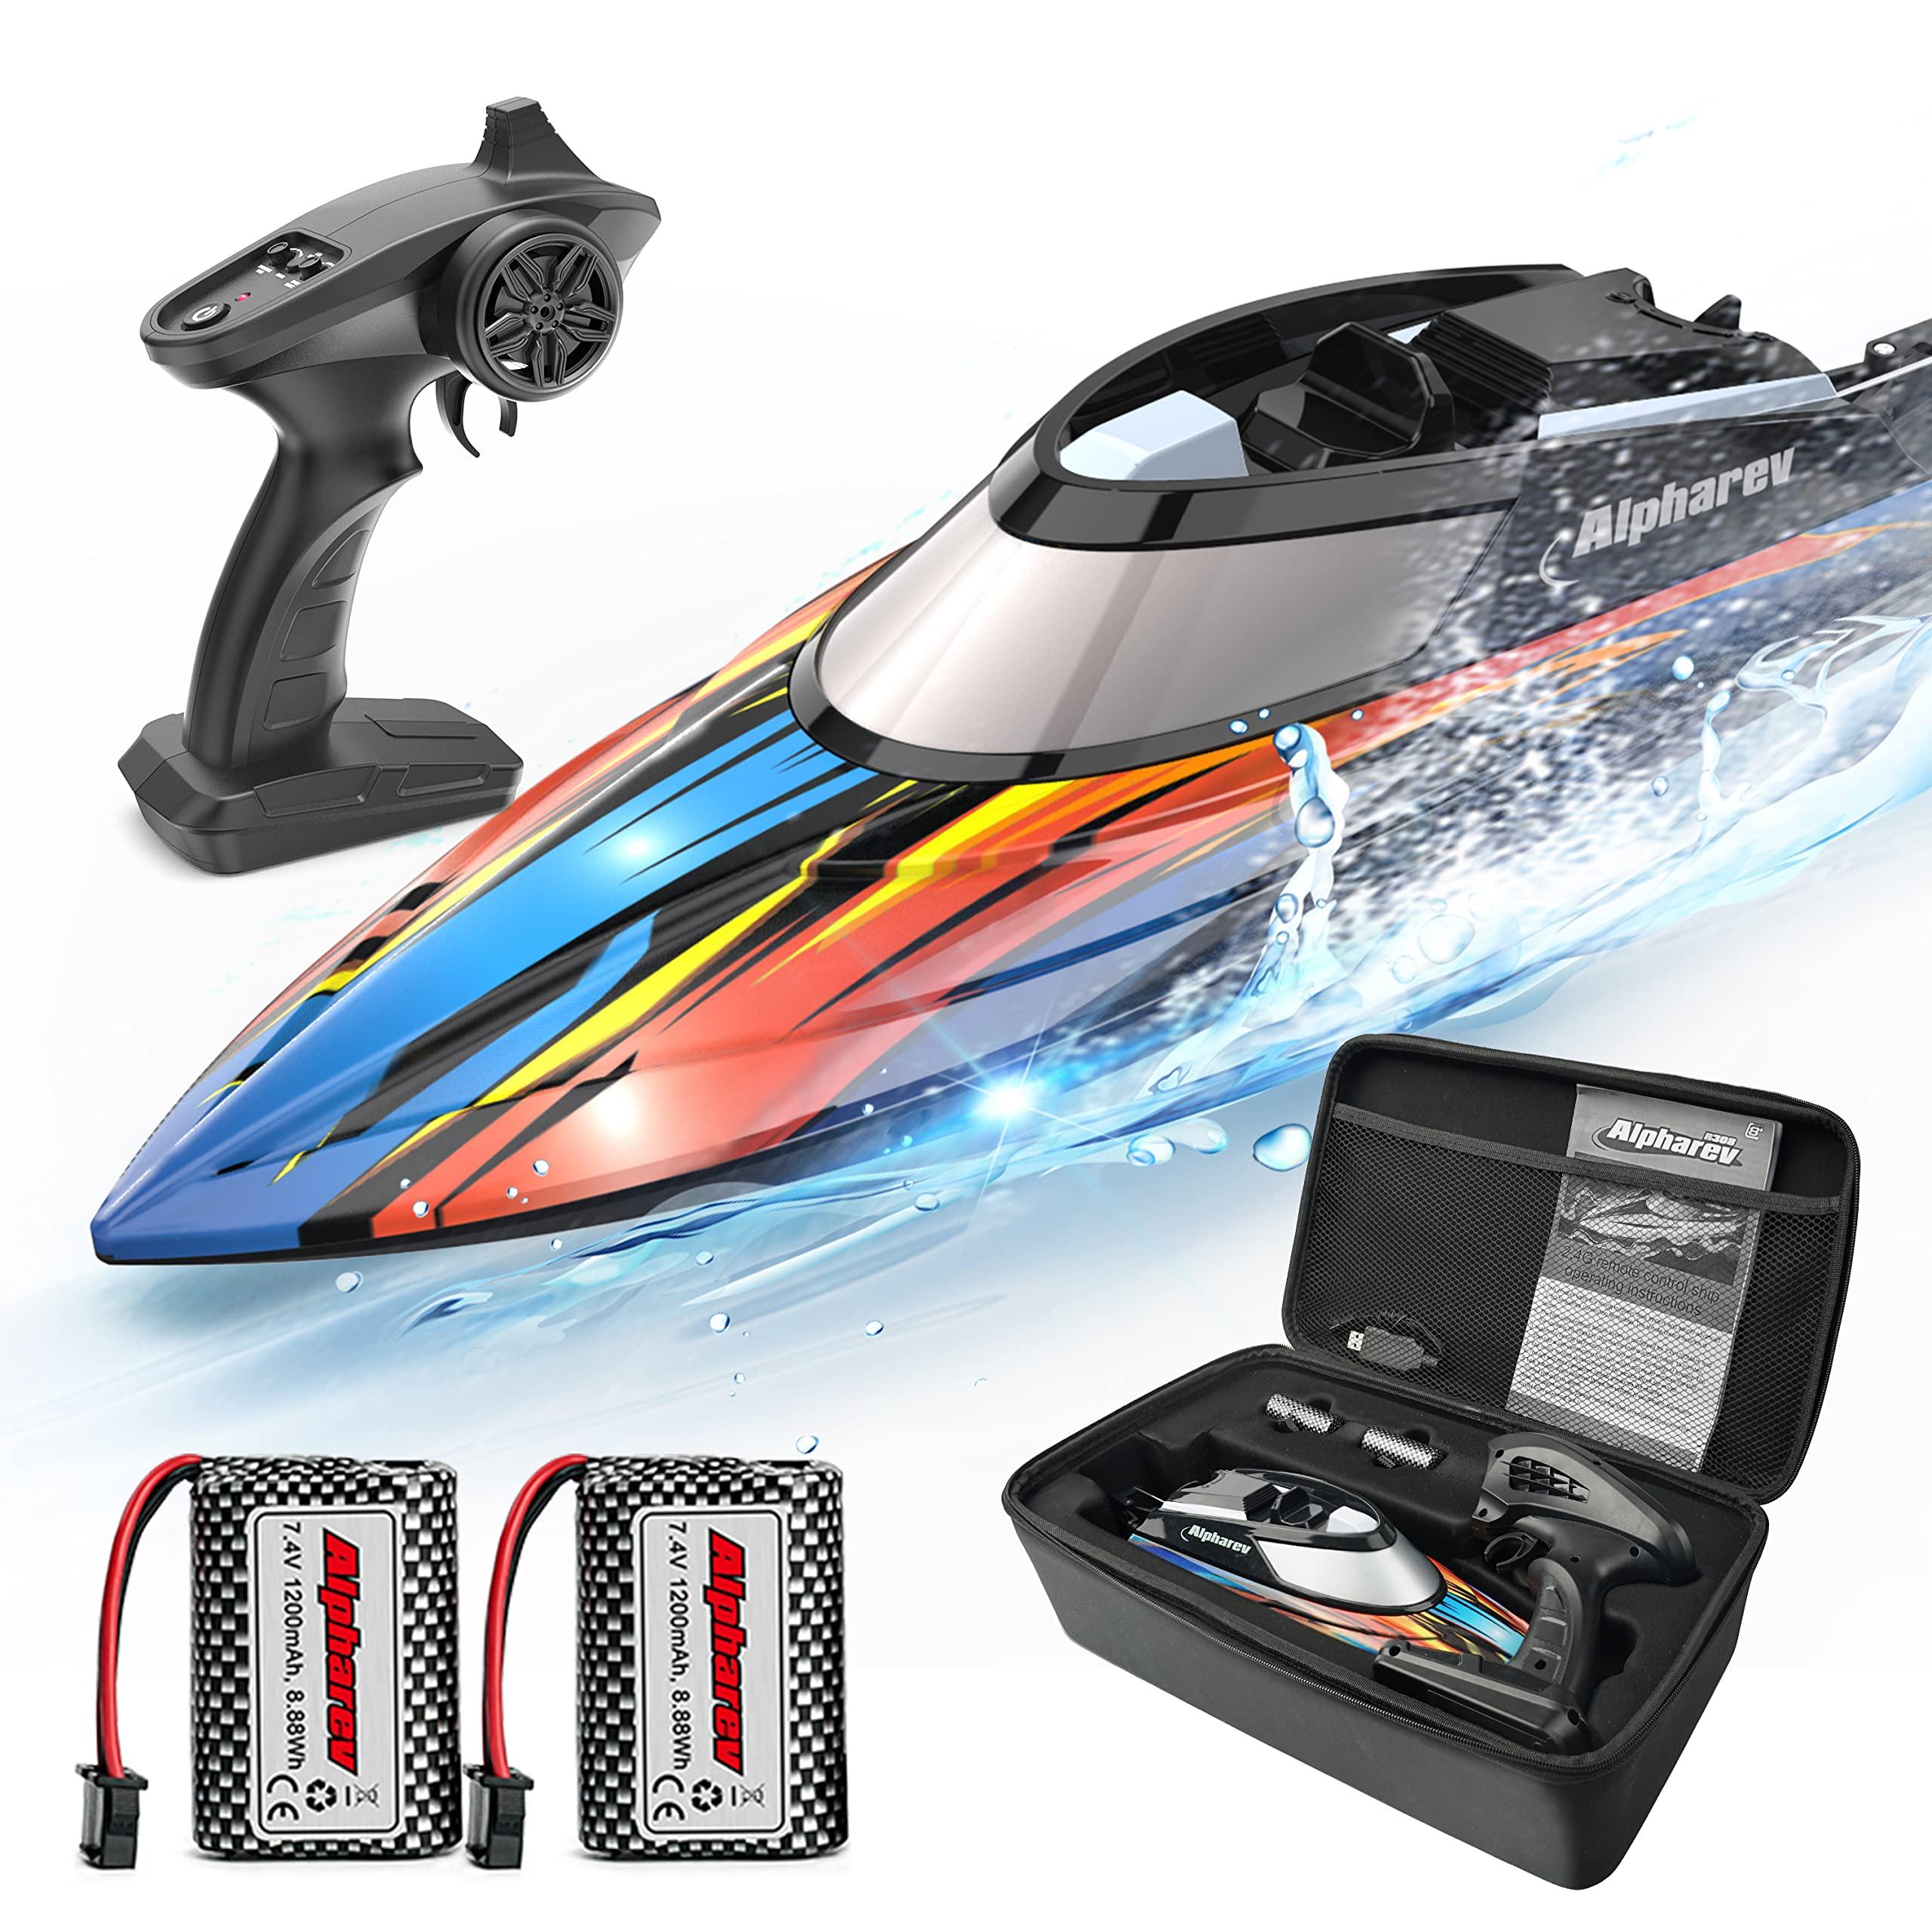 Rc Power Boats For Sale: Factors to Consider When Choosing an RC Power Boat for Sale